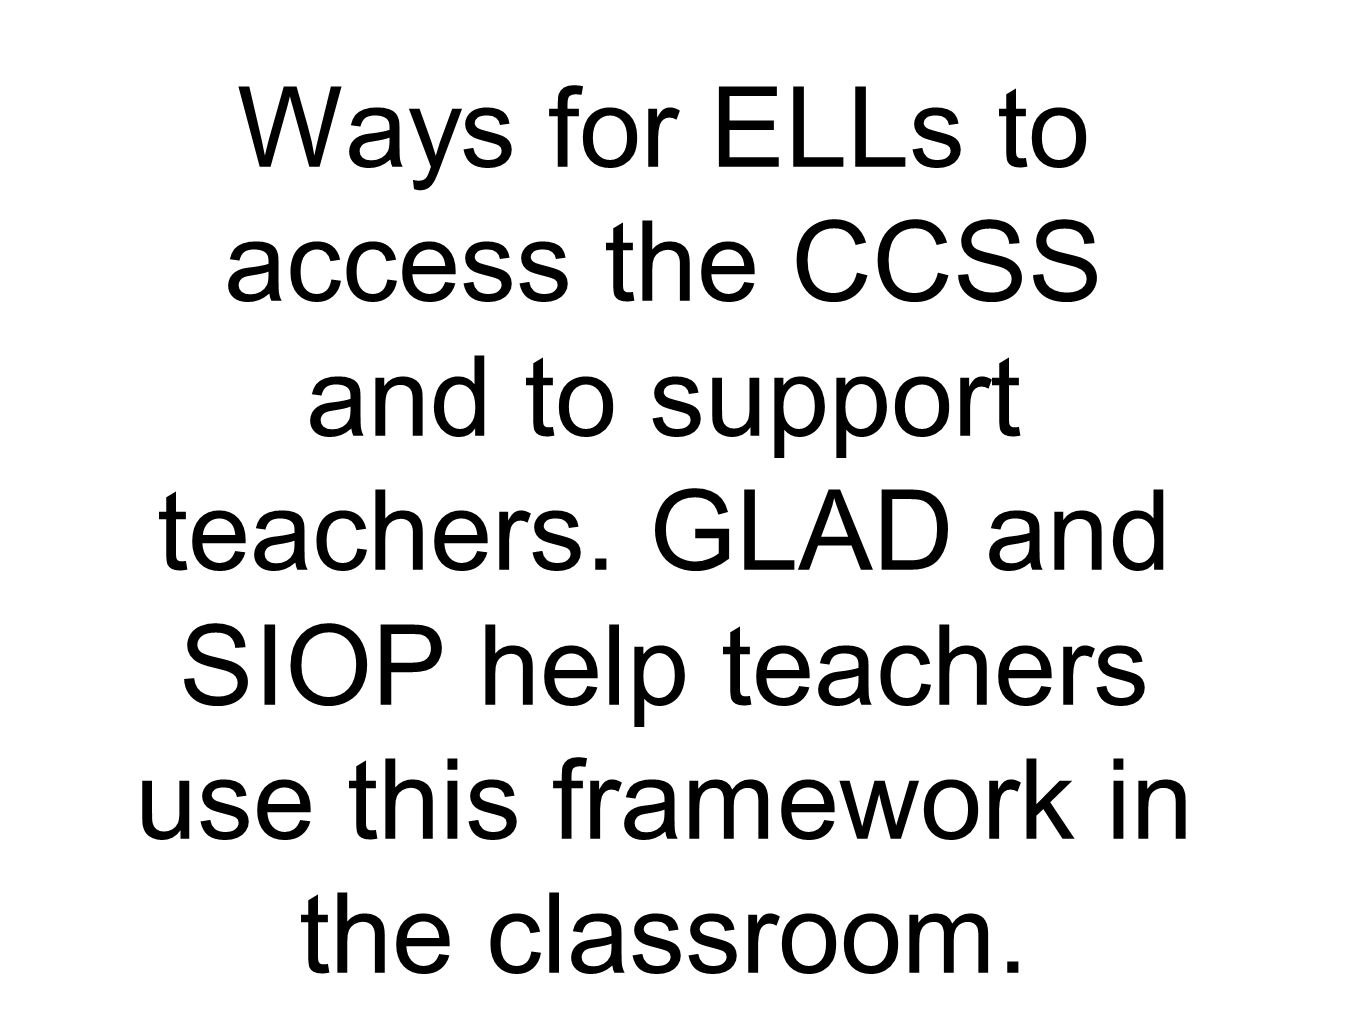 Ways for ELLs to access the CCSS and to support teachers